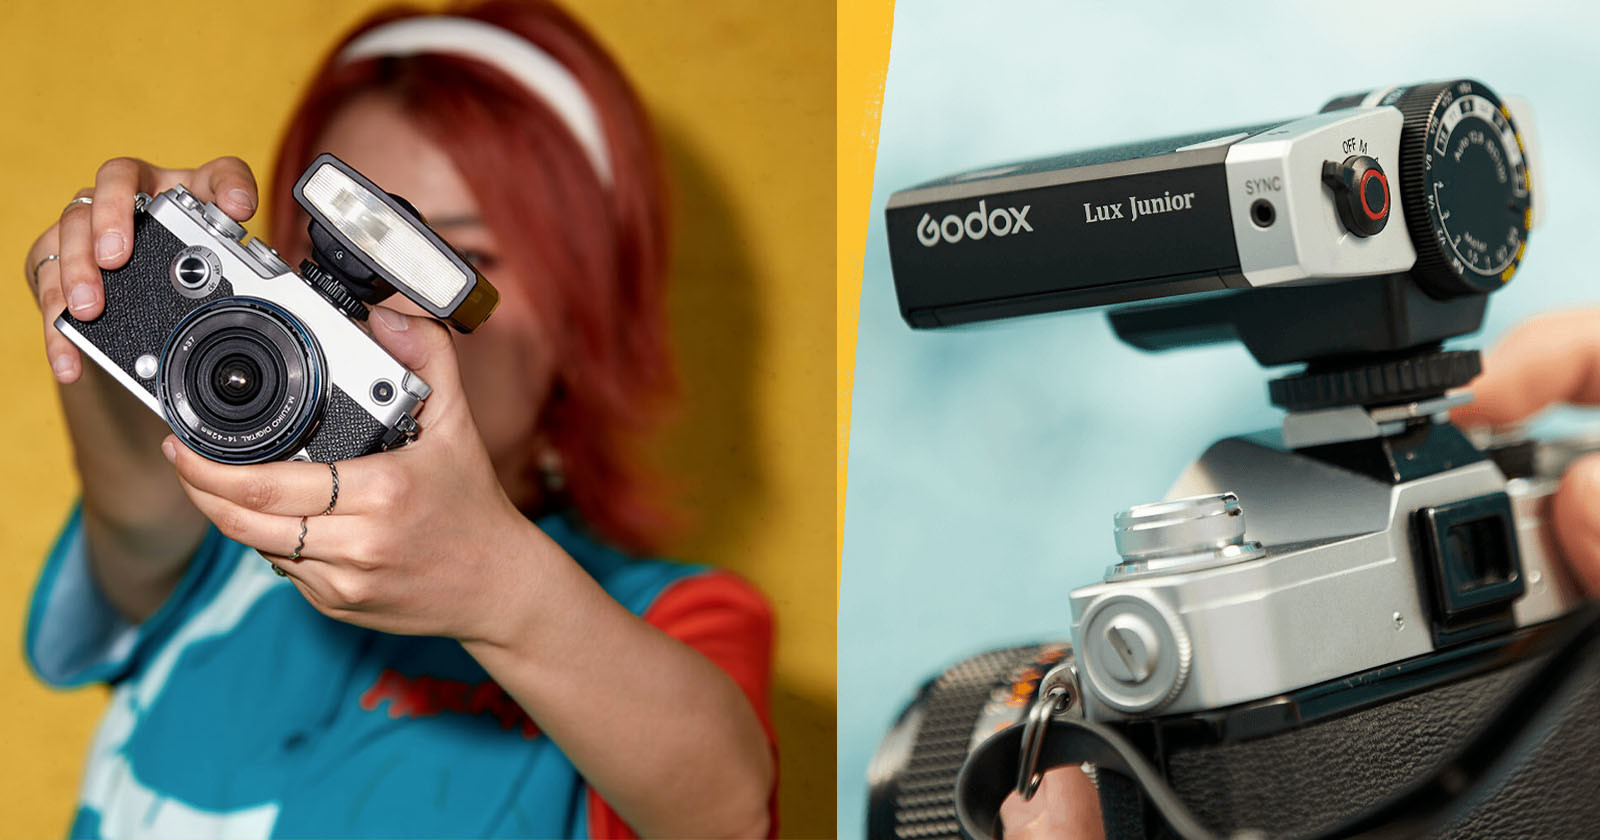 The Godox Lux Junior is a $69 Retro-Inspired On-Camera Flash